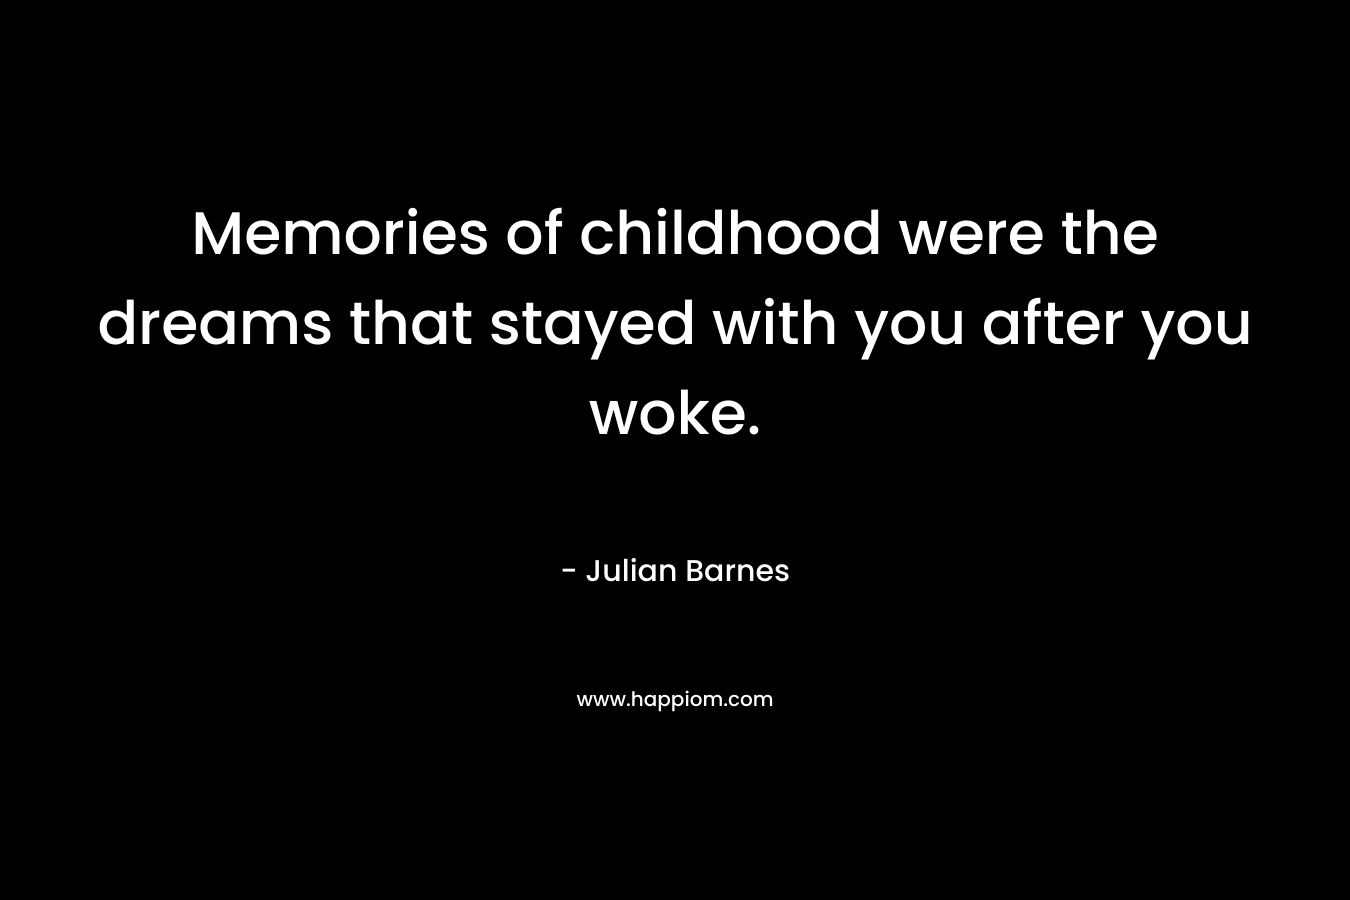 Memories of childhood were the dreams that stayed with you after you woke. – Julian Barnes